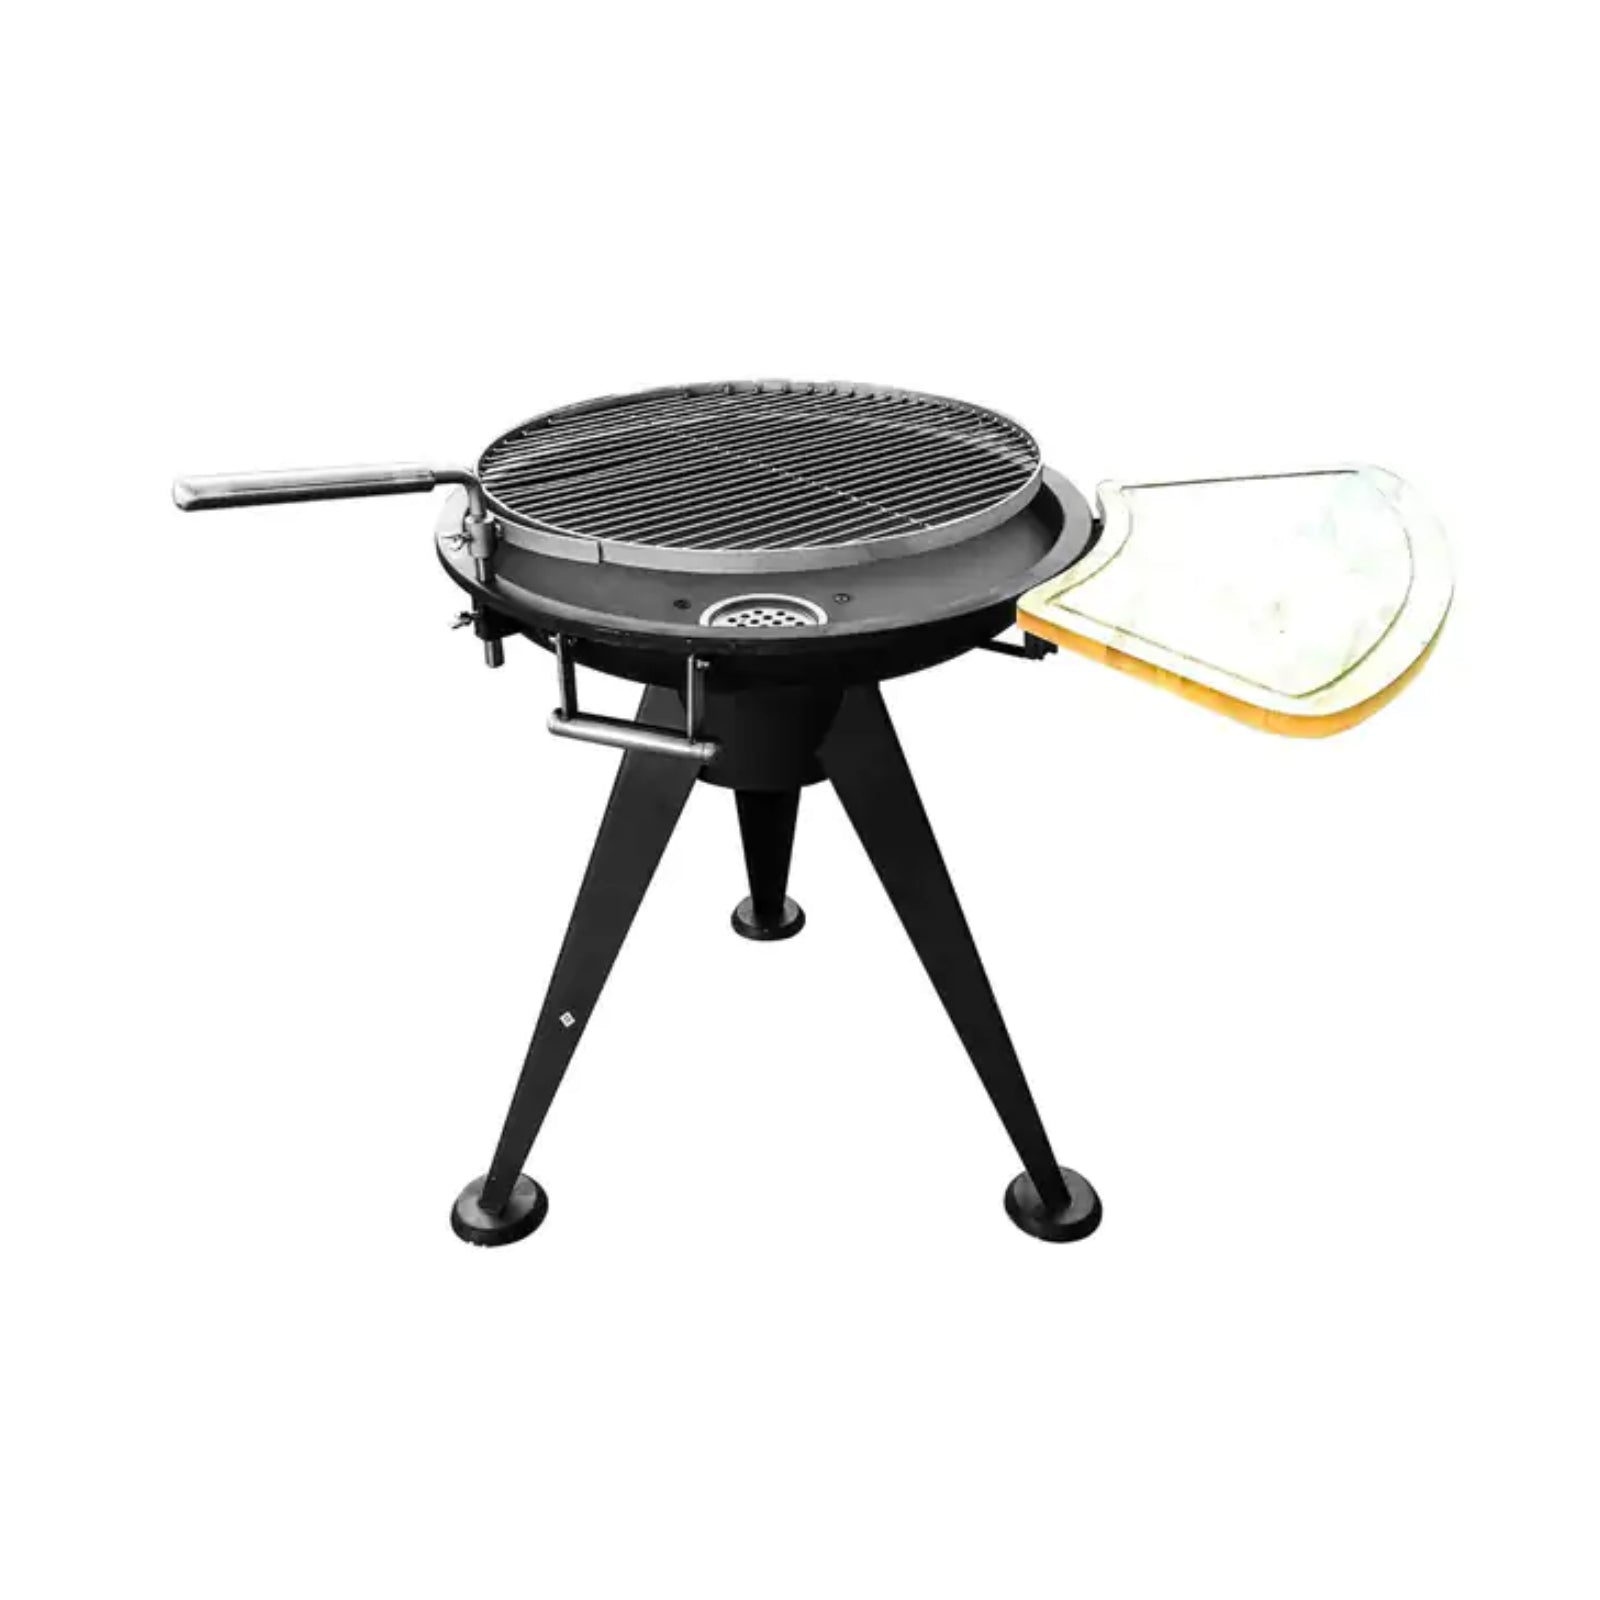 Stainless Steel Heavy Duty Adjustable Charcoal Grill - Up to 16kg - Homeware Discounts